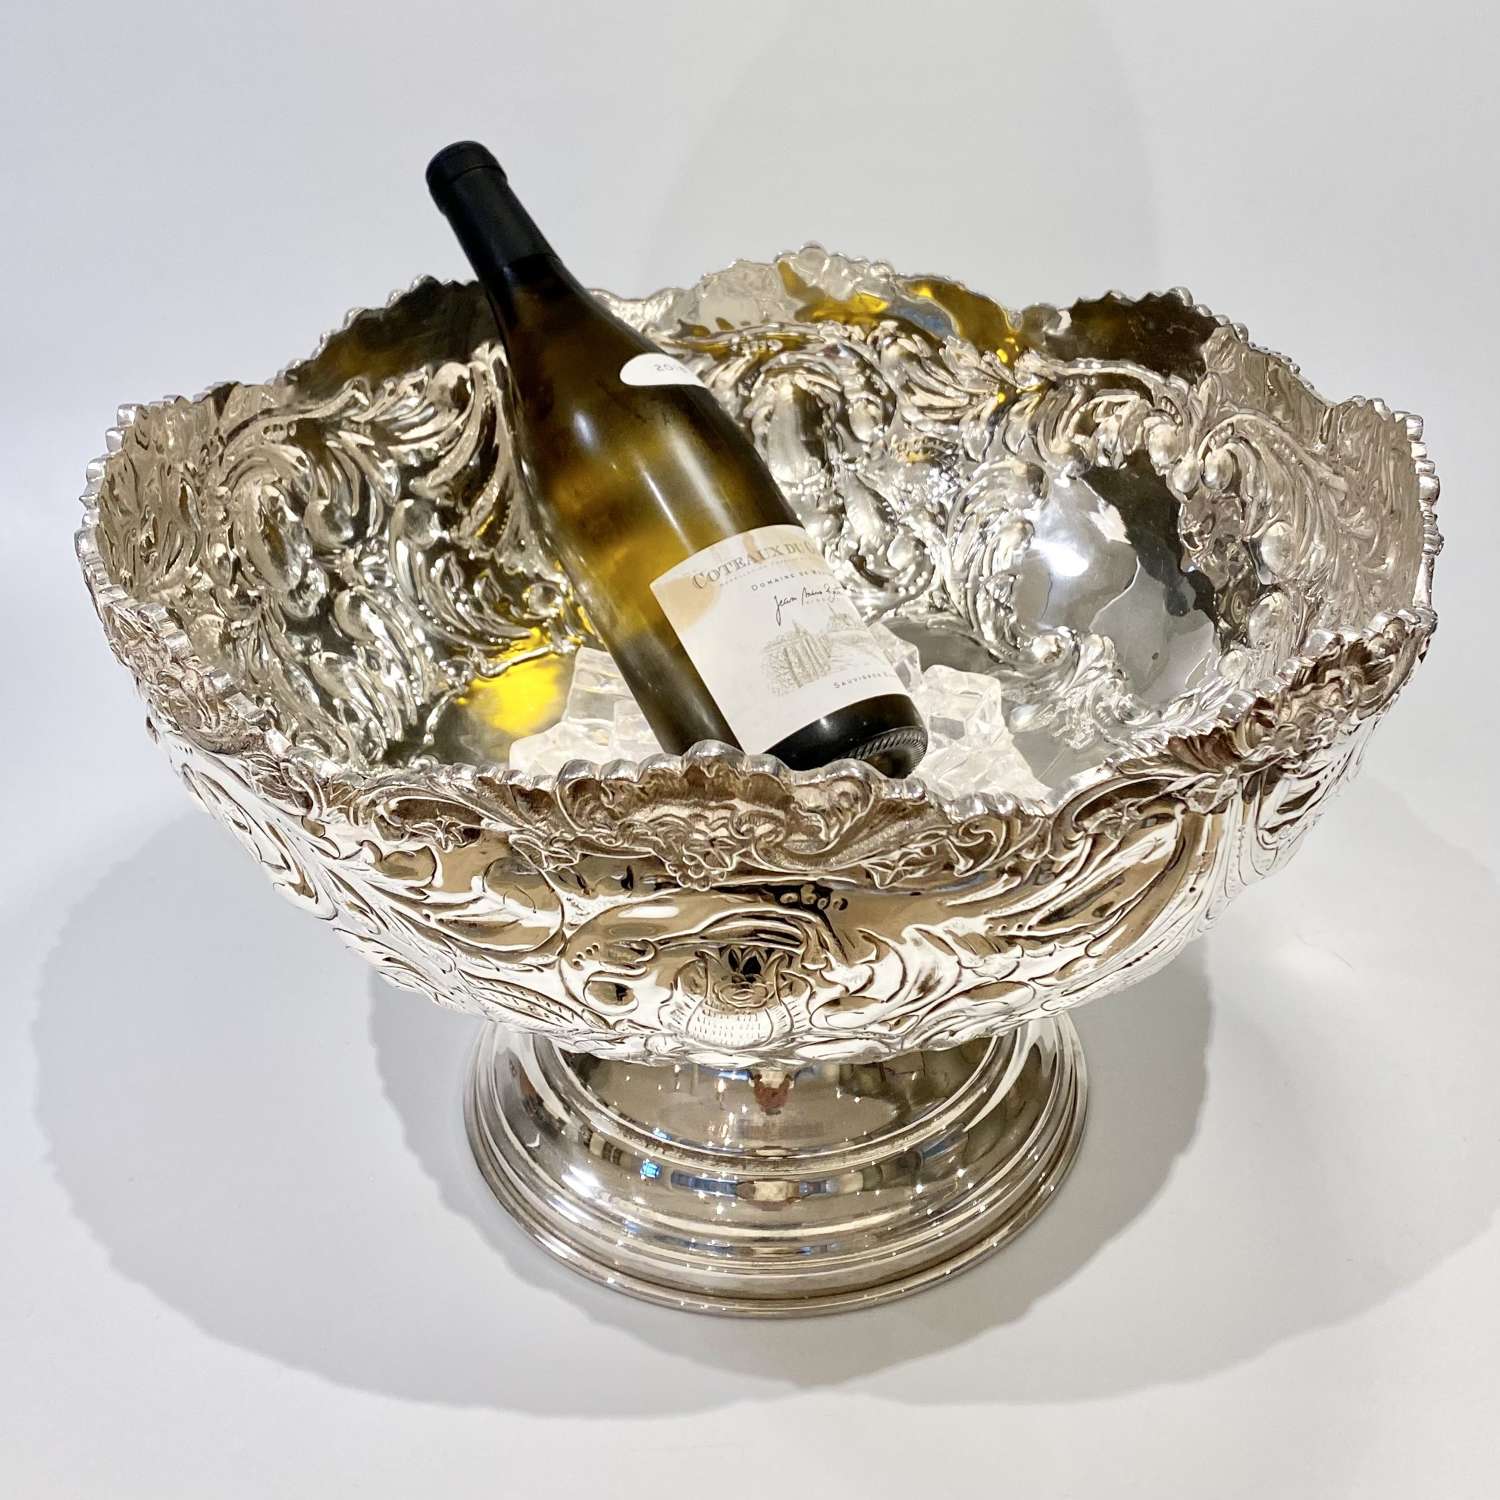 GIANT silver plated champagne wine cooler bowl